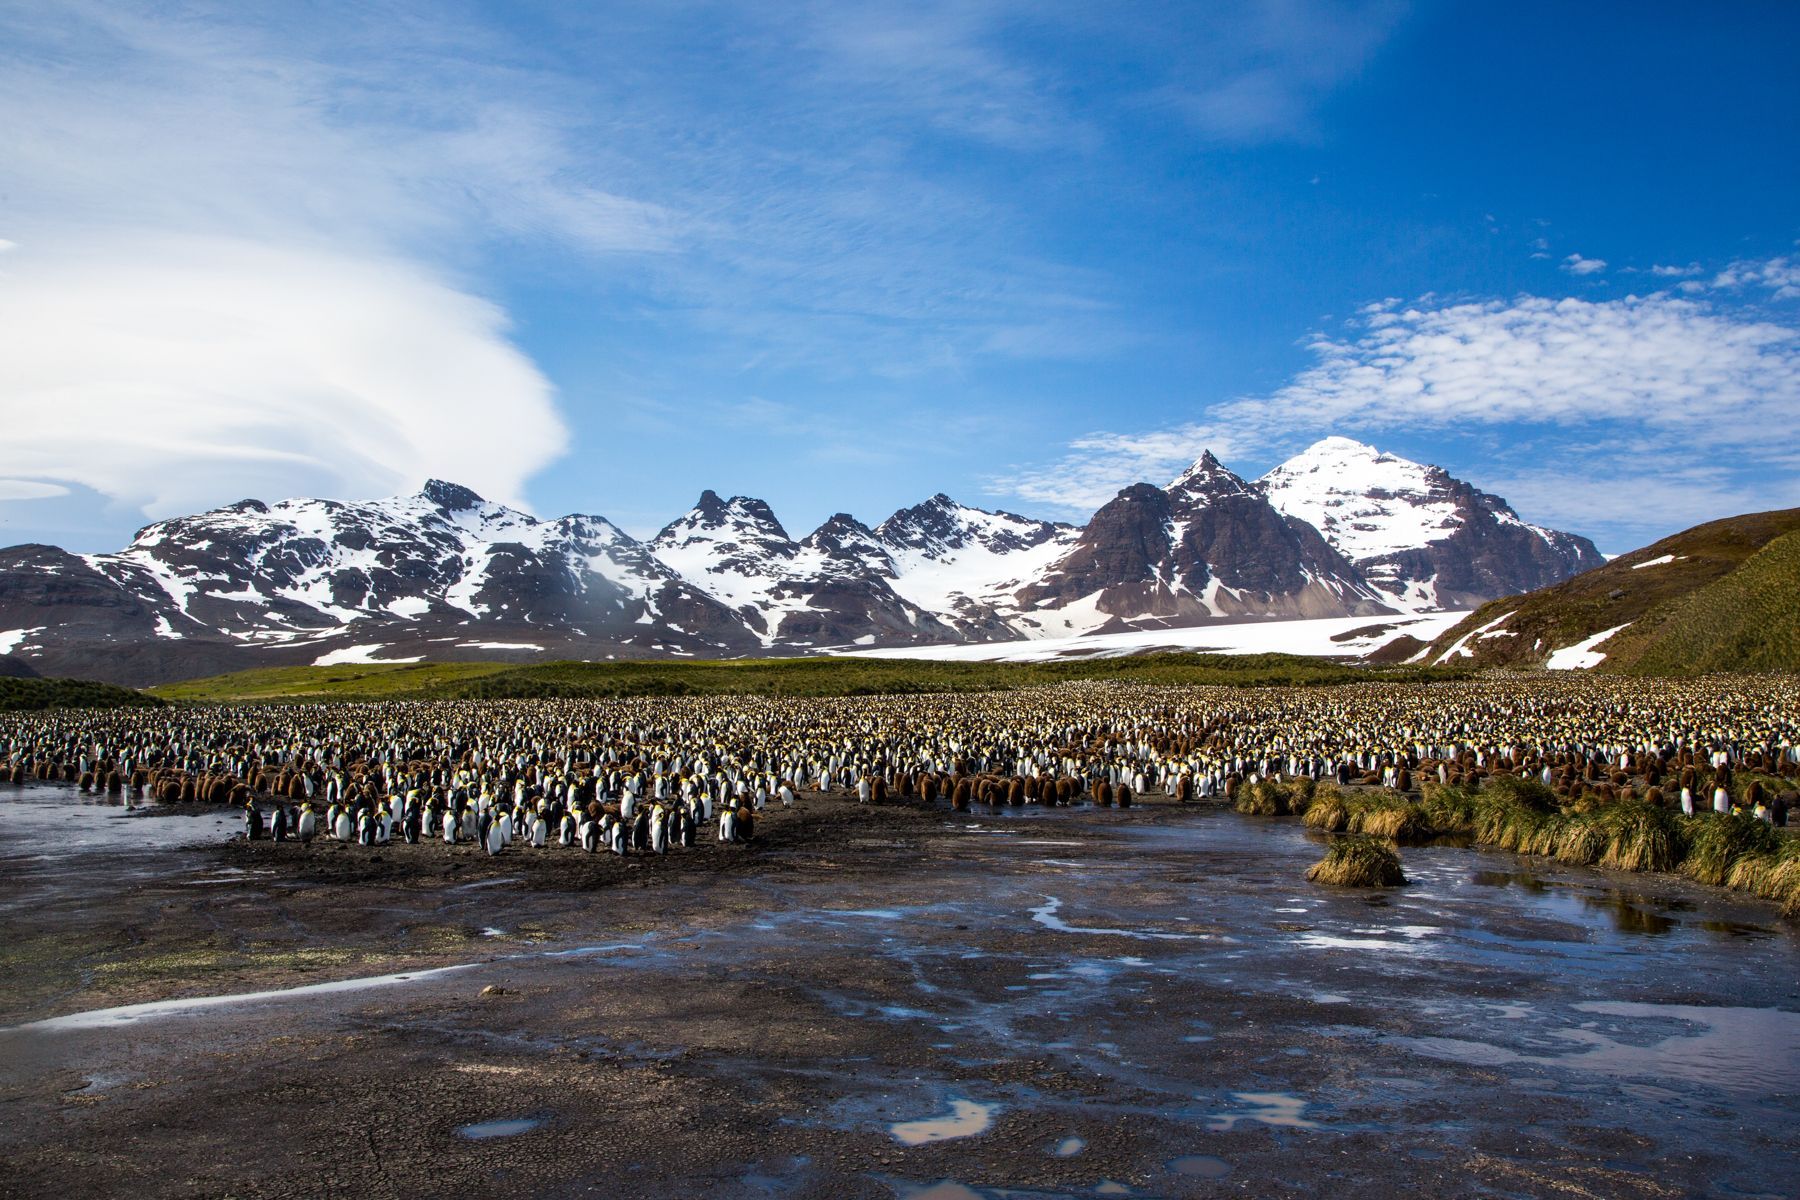 Another view of the awsome St Andrews King Penguin colony on South Georgia